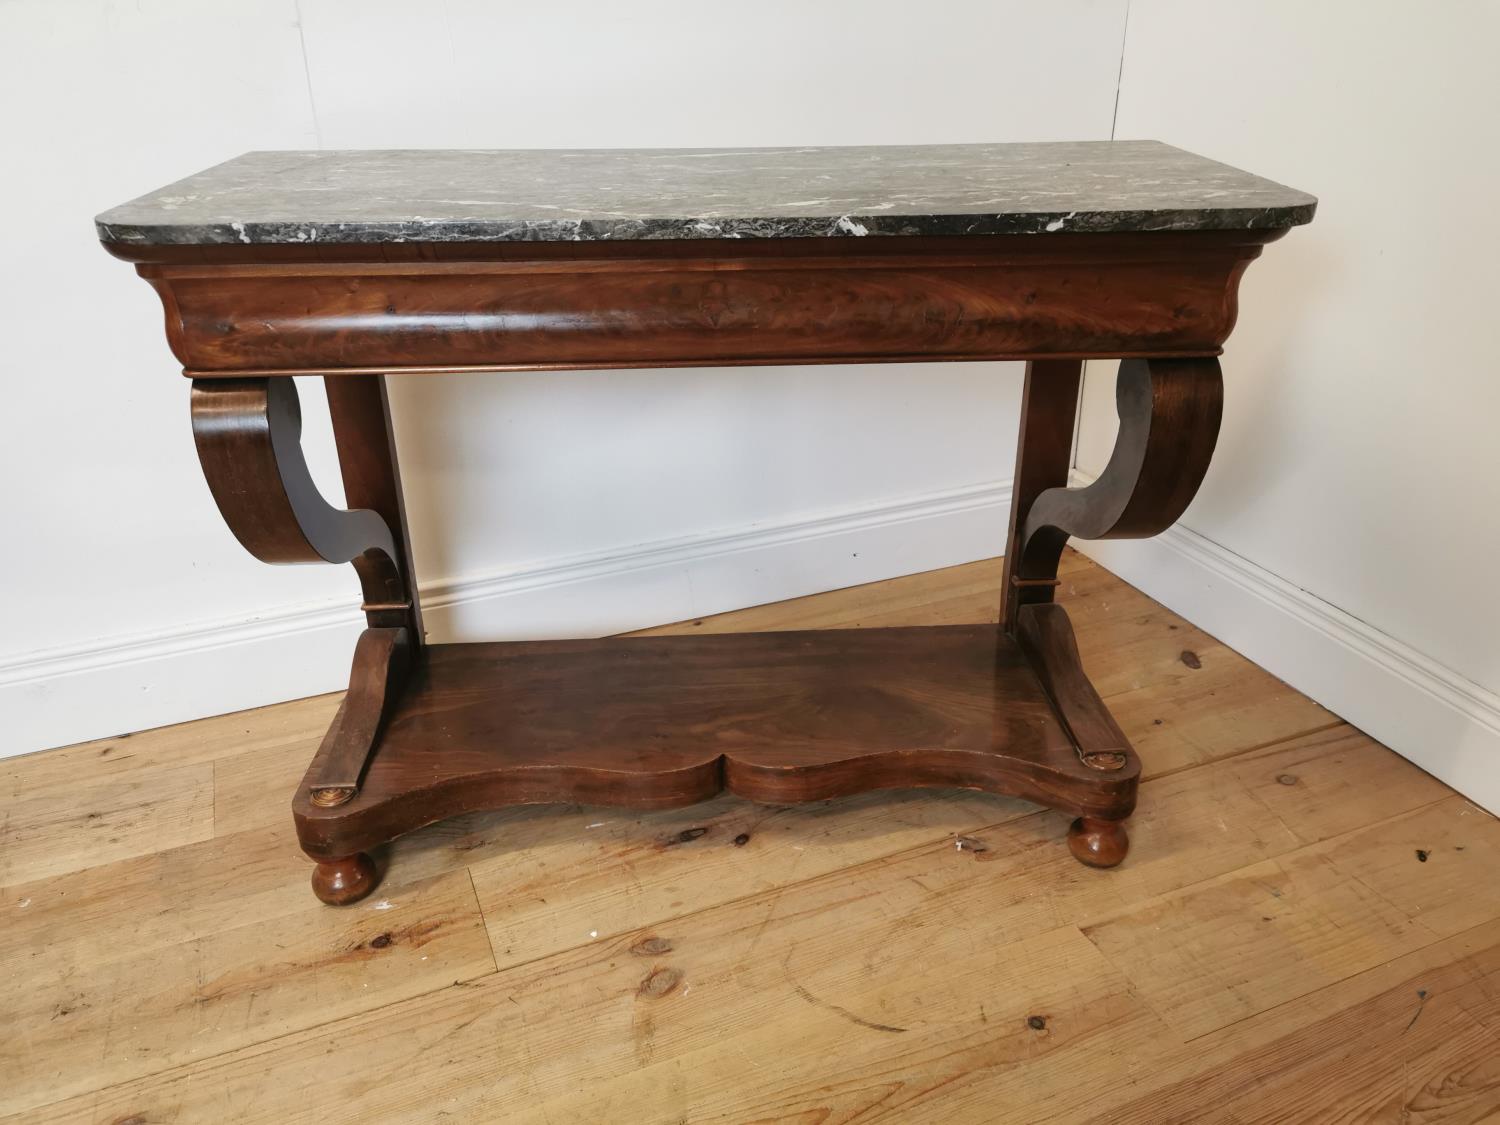 19th C. mahogany console table with marble top.